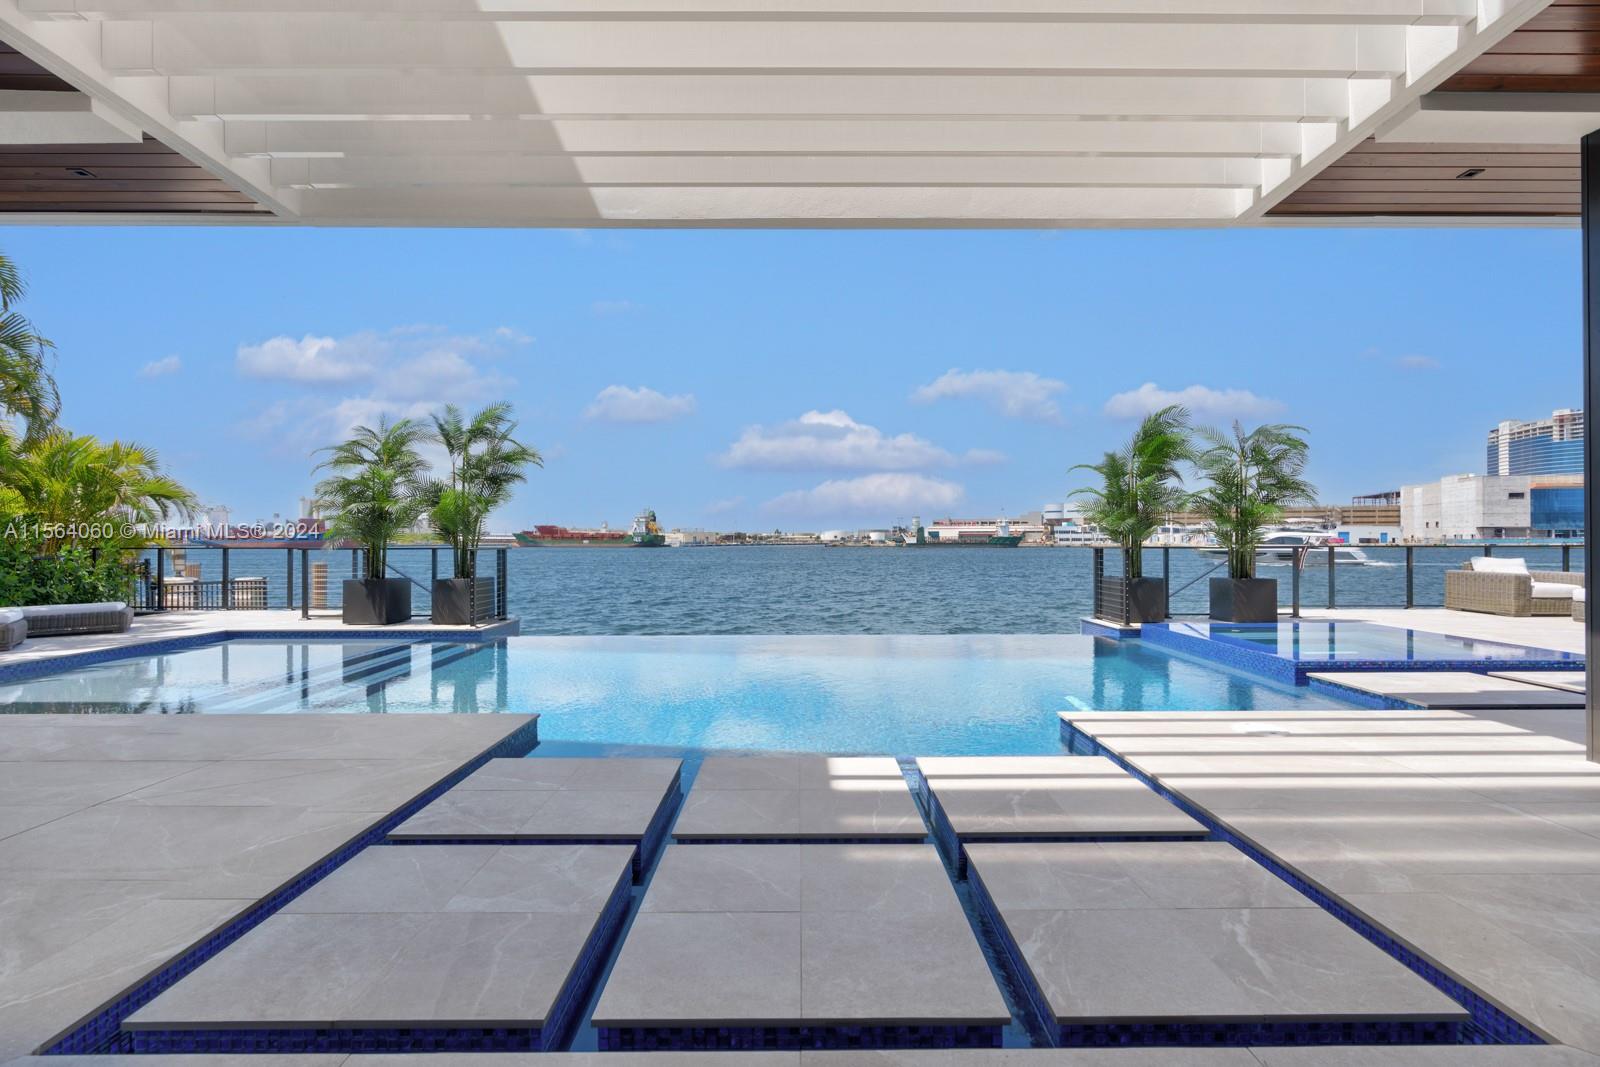 Absolutely stunning new modern waterfront estate with ultra high-end finishes. CO issued! Available turnkey! Enchanting wide water views of the intracoastal, ocean inlet, & a parade of cruise ships & yachts. Walking distance to Pier 66 marina, dining, and beaches. Only 10 mins to FLL airport. Floor-to-ceiling sliding glass doors, floating staircase w/ glass banister, massive glass pivot door, custom Italian cabinets & porcelain tile throughout, Miele appliances, 3 wet bars, club room, & 1st floor suite, optional 6th bedroom. 2 primary suites w/ spa baths & expansive closets, and 2nd floor lounge all with wide water views. 4 private terraces, motorized curtains/shades, 11 ft ceilings on 2nd floor, outdoor kitchen with covered dining, ample entertaining space, and a resort style pool & spa.